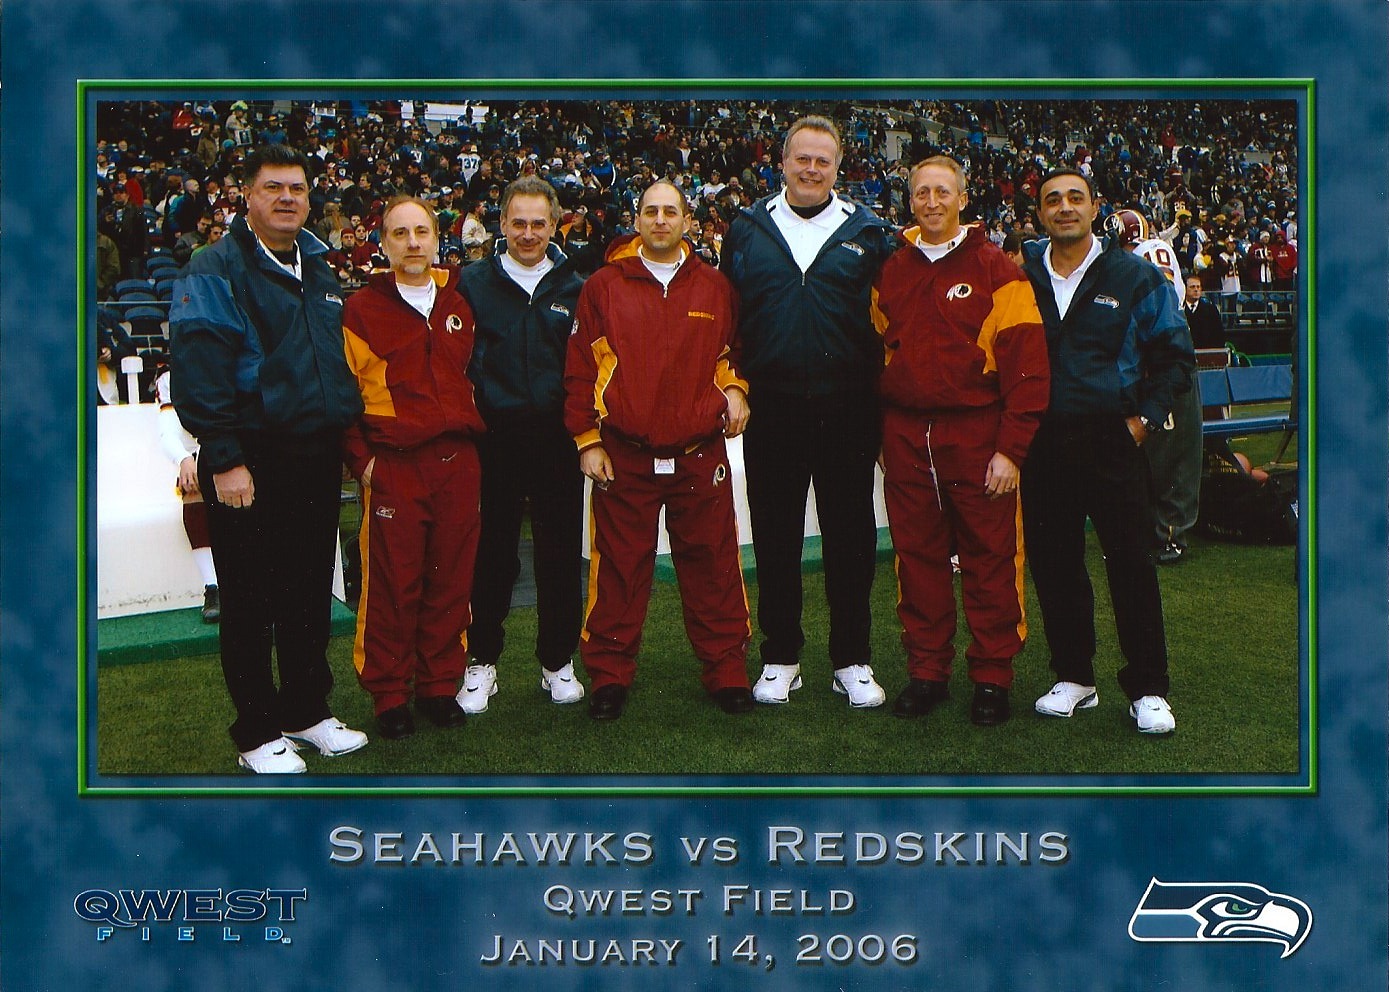 Seahawks Redskins Divisional Playoff Game 2006